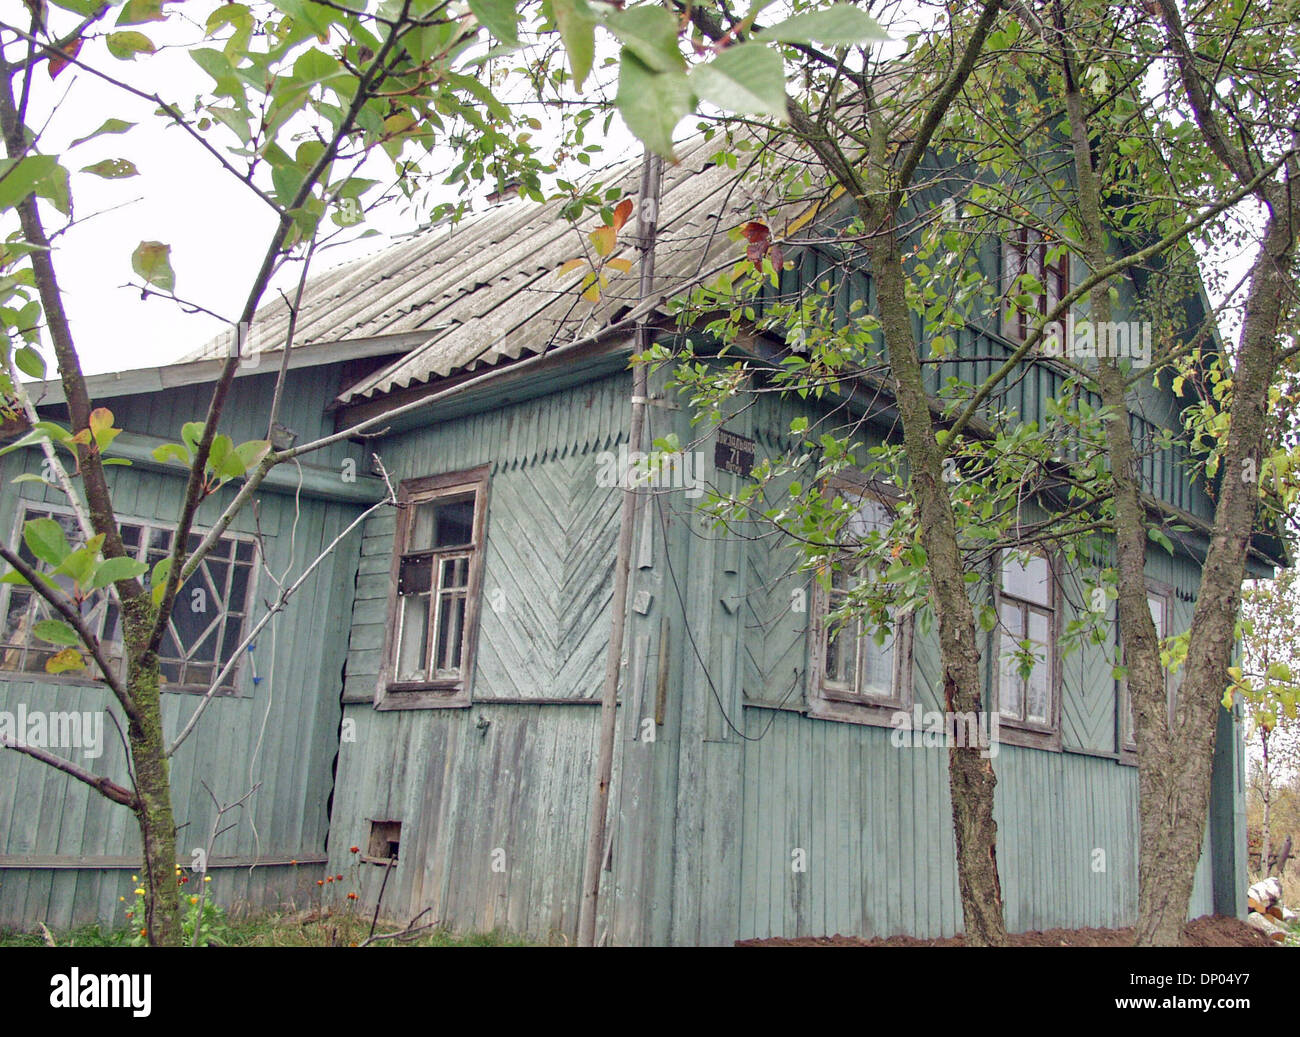 Sep 28, 2006 - Tosno, Russia - Country house (Dacha) that belonged to the parents of Russian president Vladimir Putin. The Dacha is located in Tosno area of Leningrad region. (Credit Image: © PhotoXpress/ZUMA Press) Stock Photo